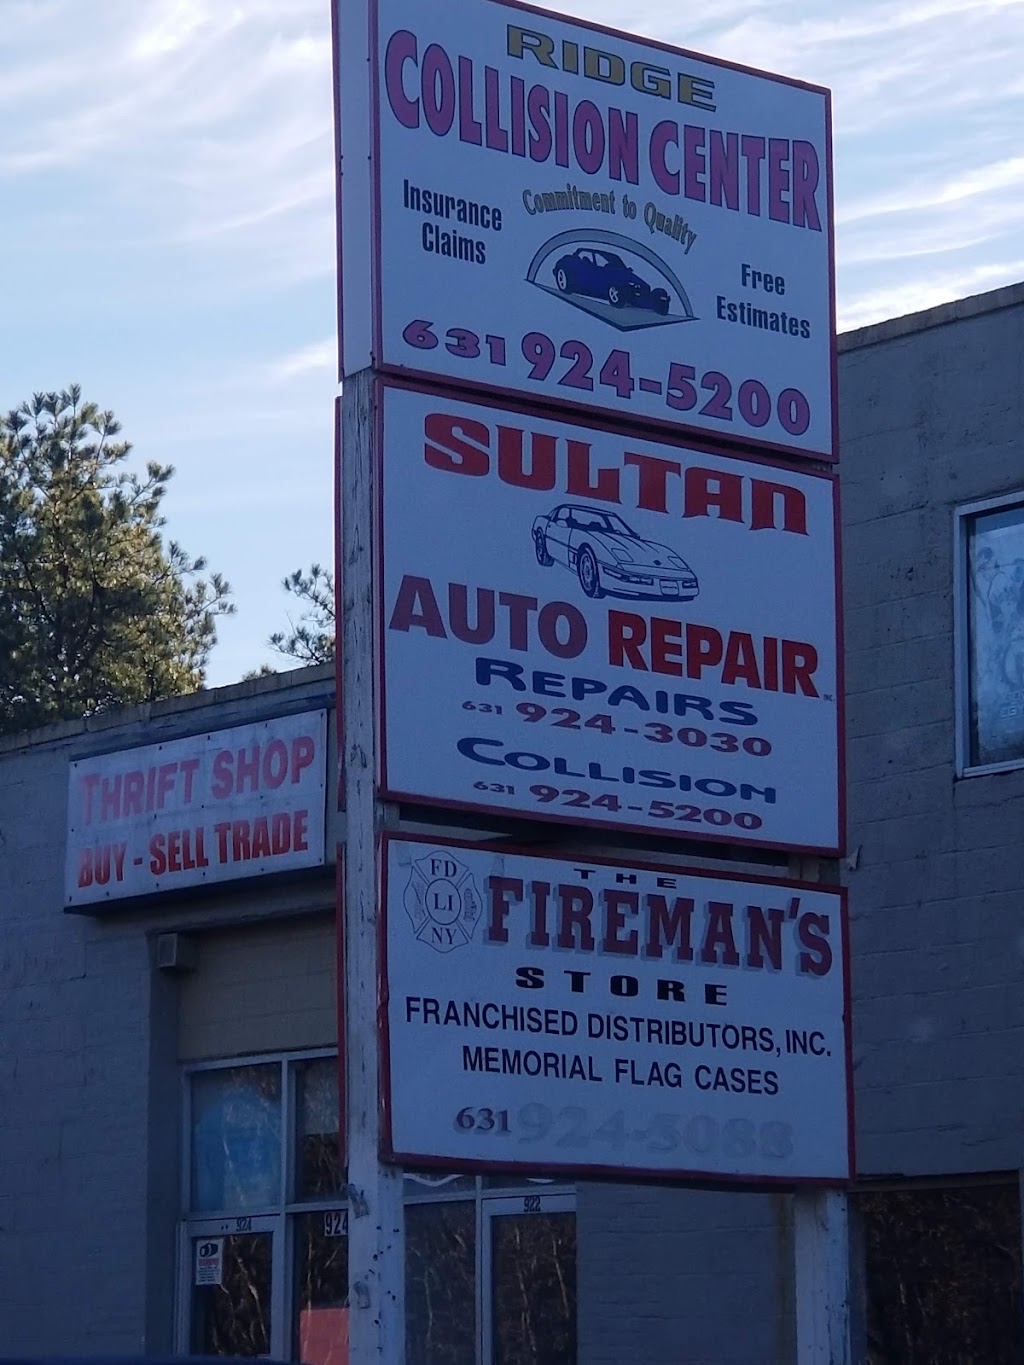 Sultan Auto Repair | 920 Middle Country Rd, Ridge, NY 11961 | Phone: (631) 924-3030